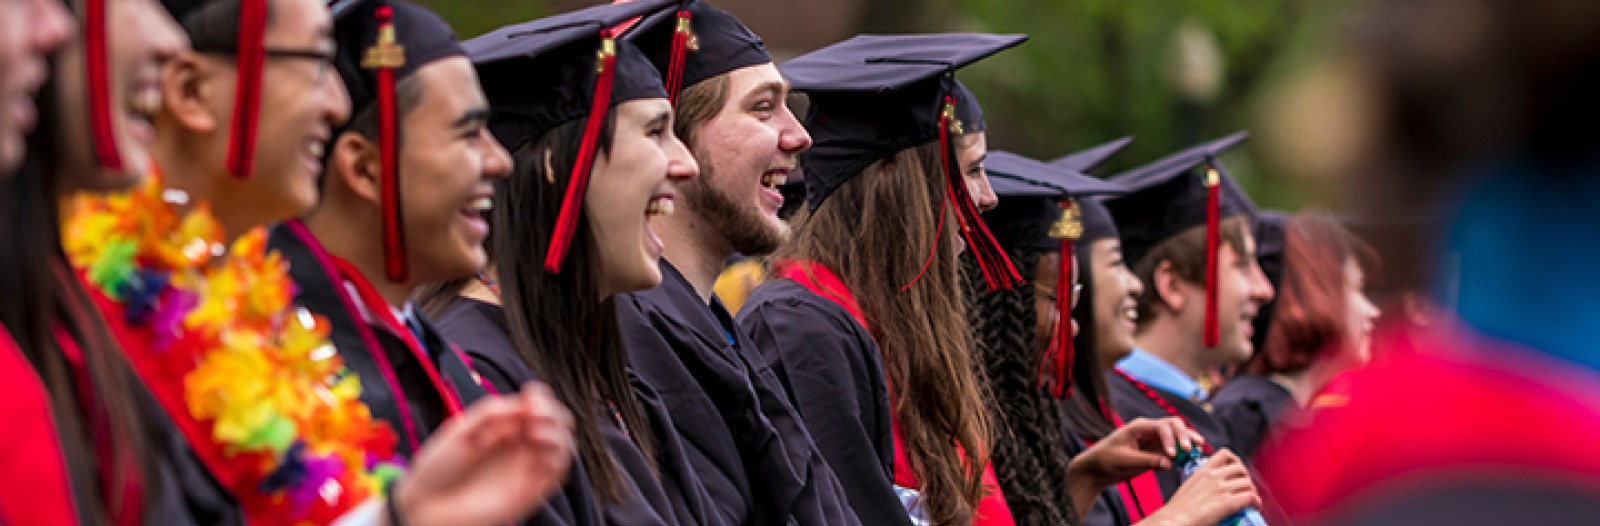 Students celebrating at Commencement 